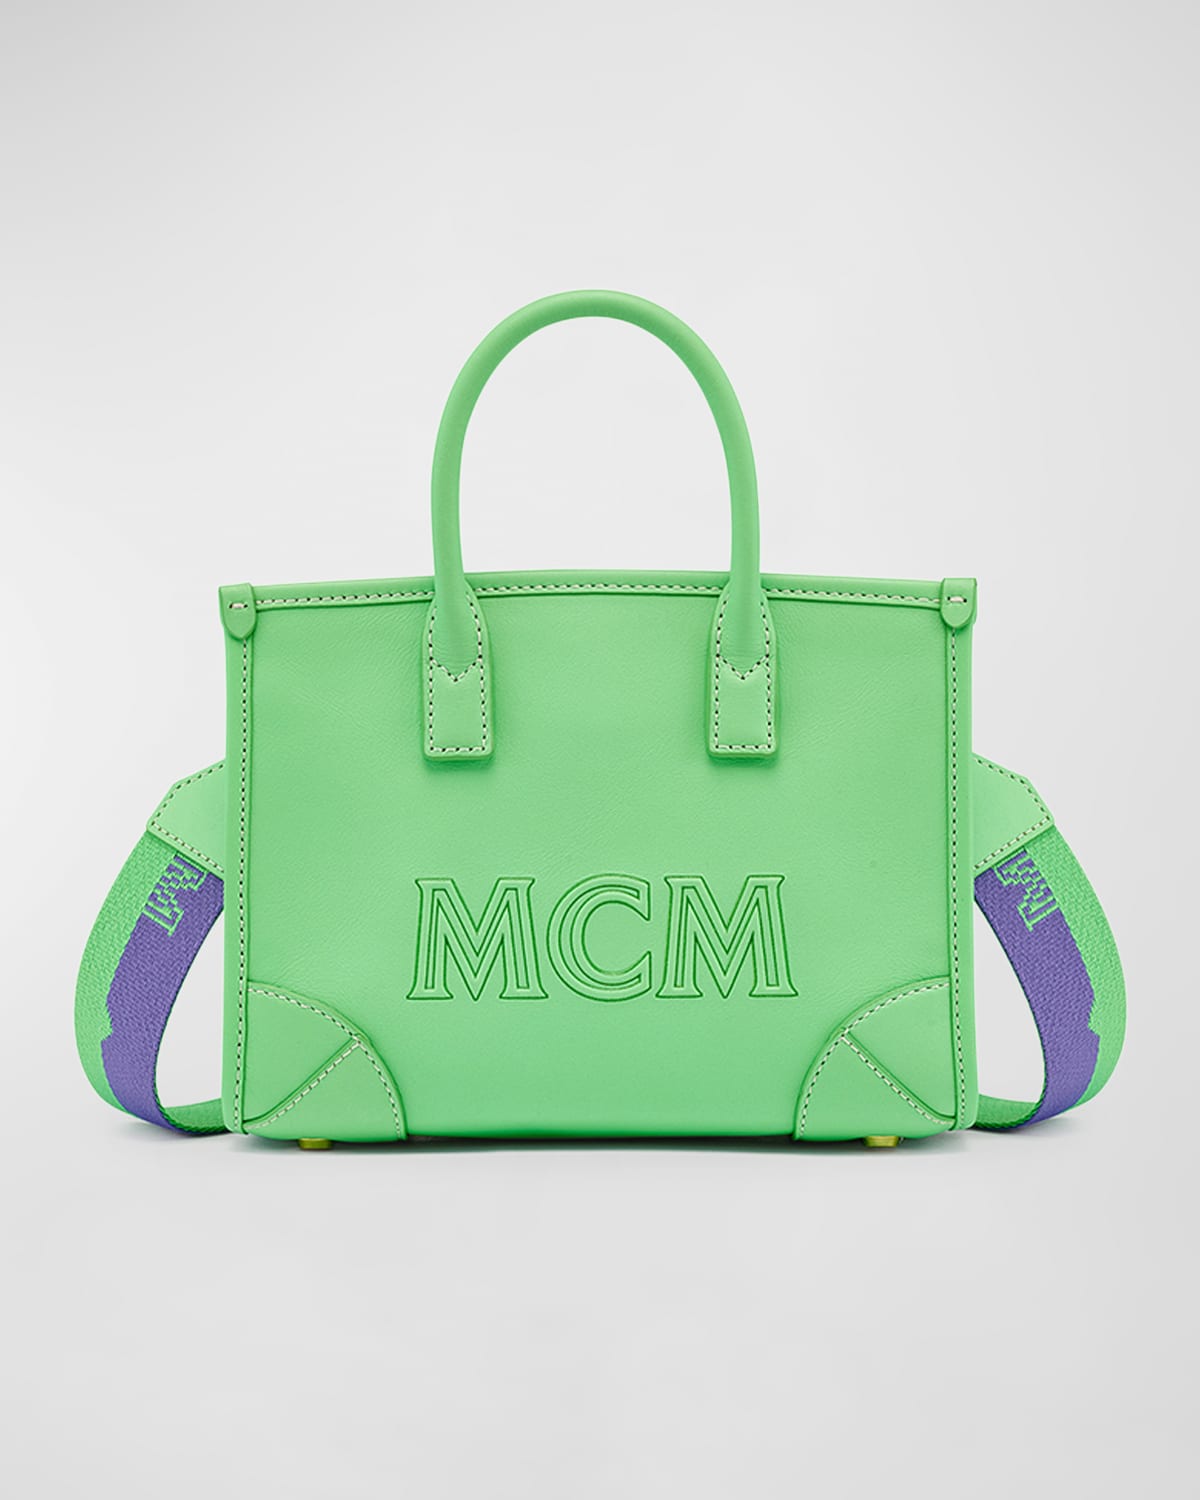 Mcm Mini Munchen Tote In Spanish Calf Leather In Summer Grey